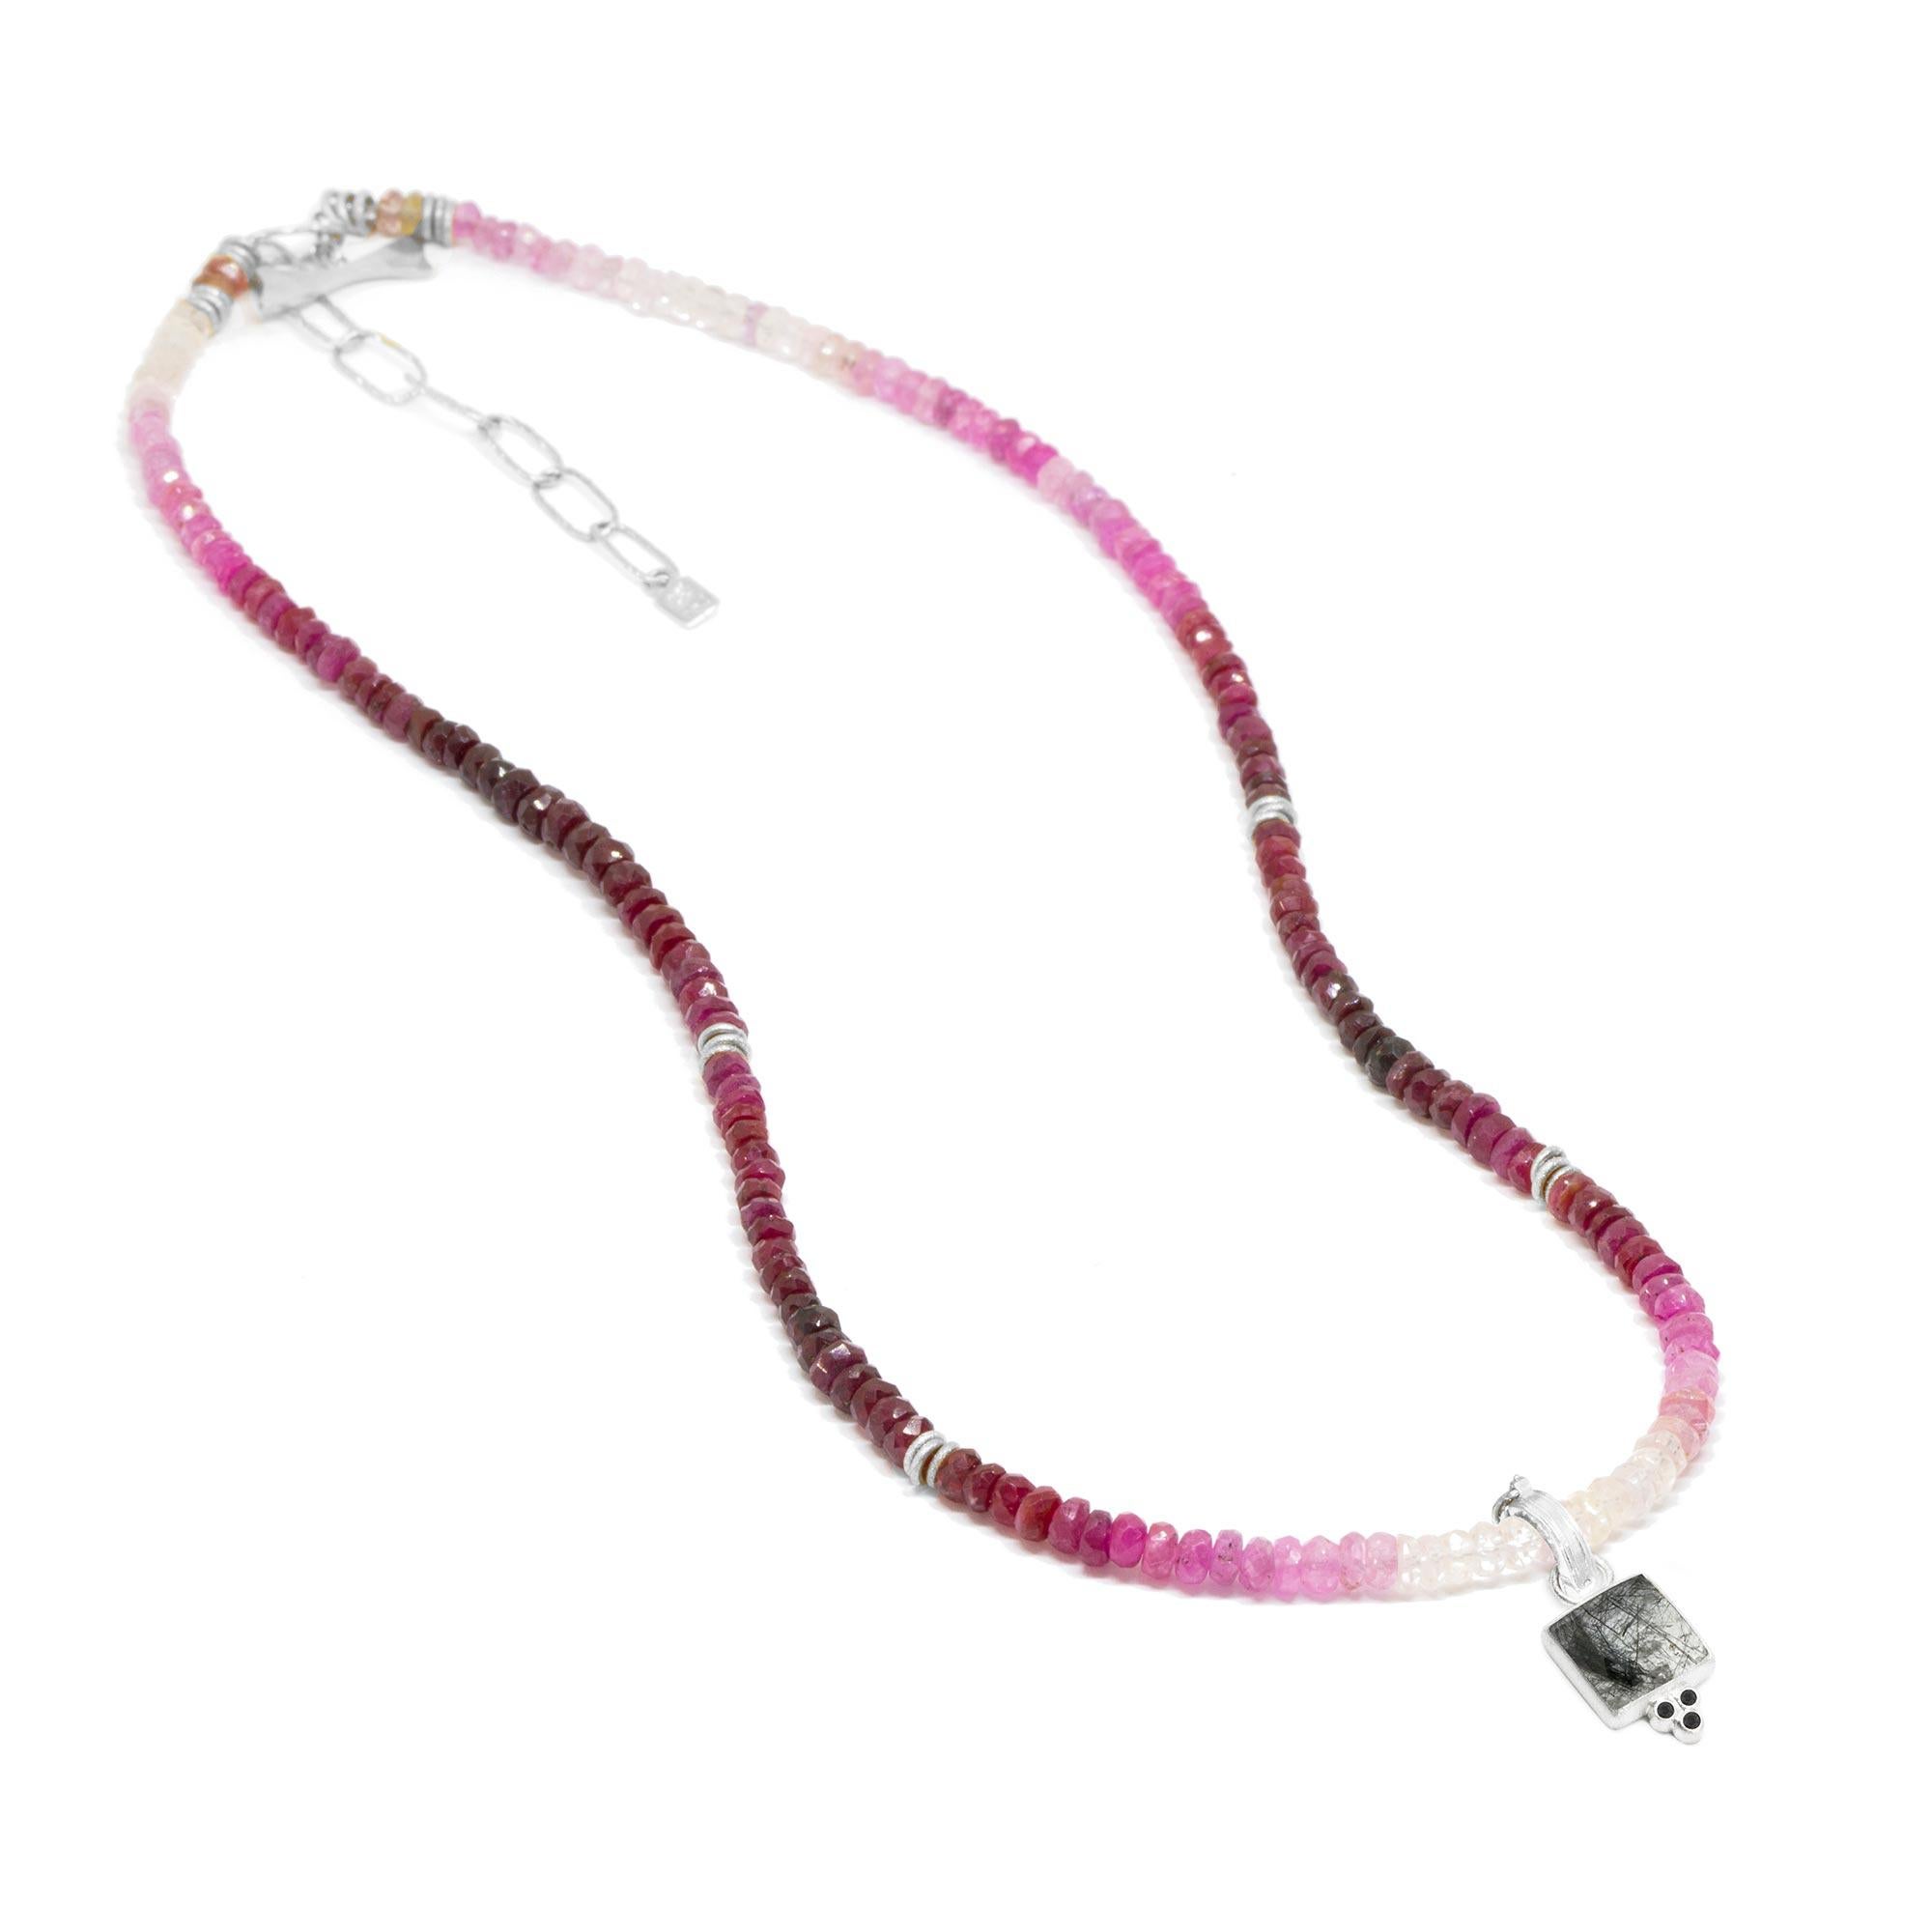 The best part about the Short Heritage Silver Necklette isn’t just that it can be worn long, doubled-up, or as a wrap bracelet (although that’s pretty cool). It’s that you can thread any of our Charms onto the ruby beads—have fun playing with all